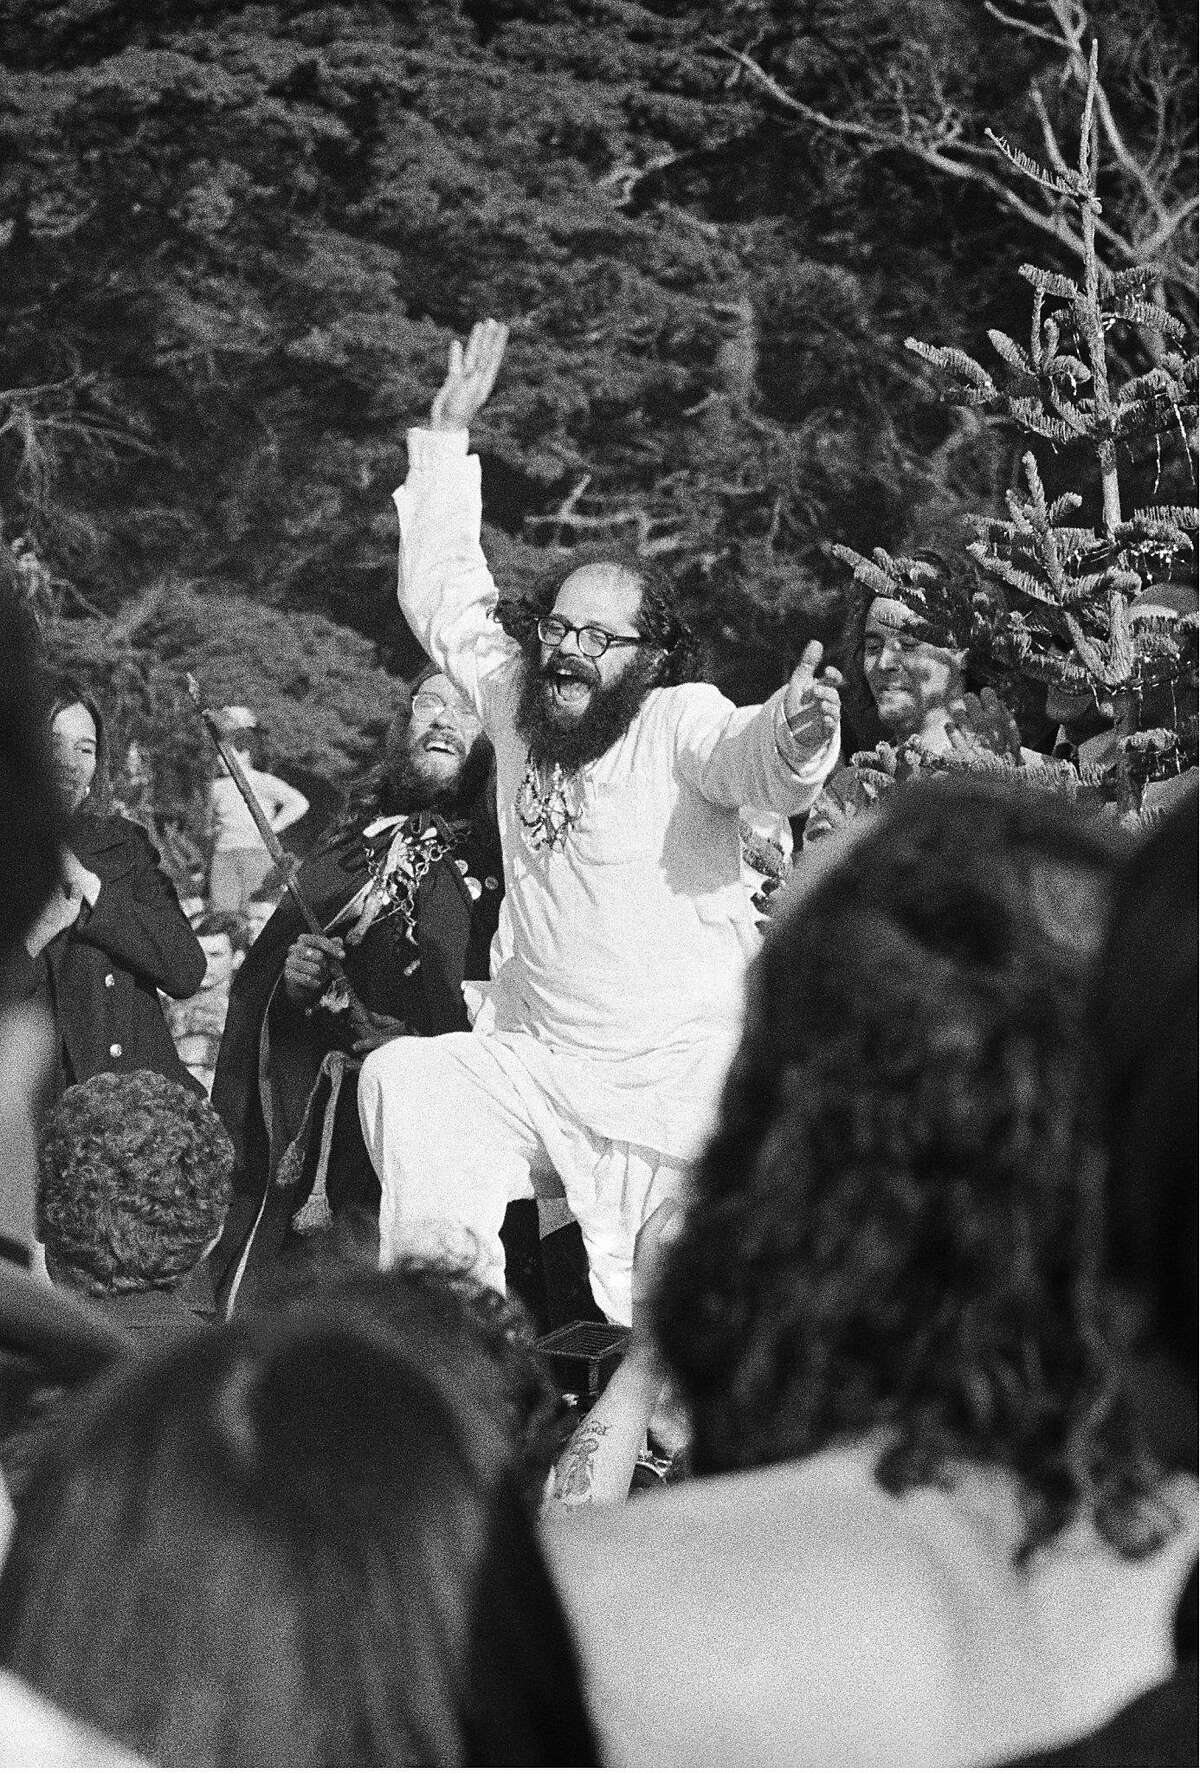 Allen Ginsberg dances to the Grateful Dead at the "Gathering of the Tribes" in 1967.